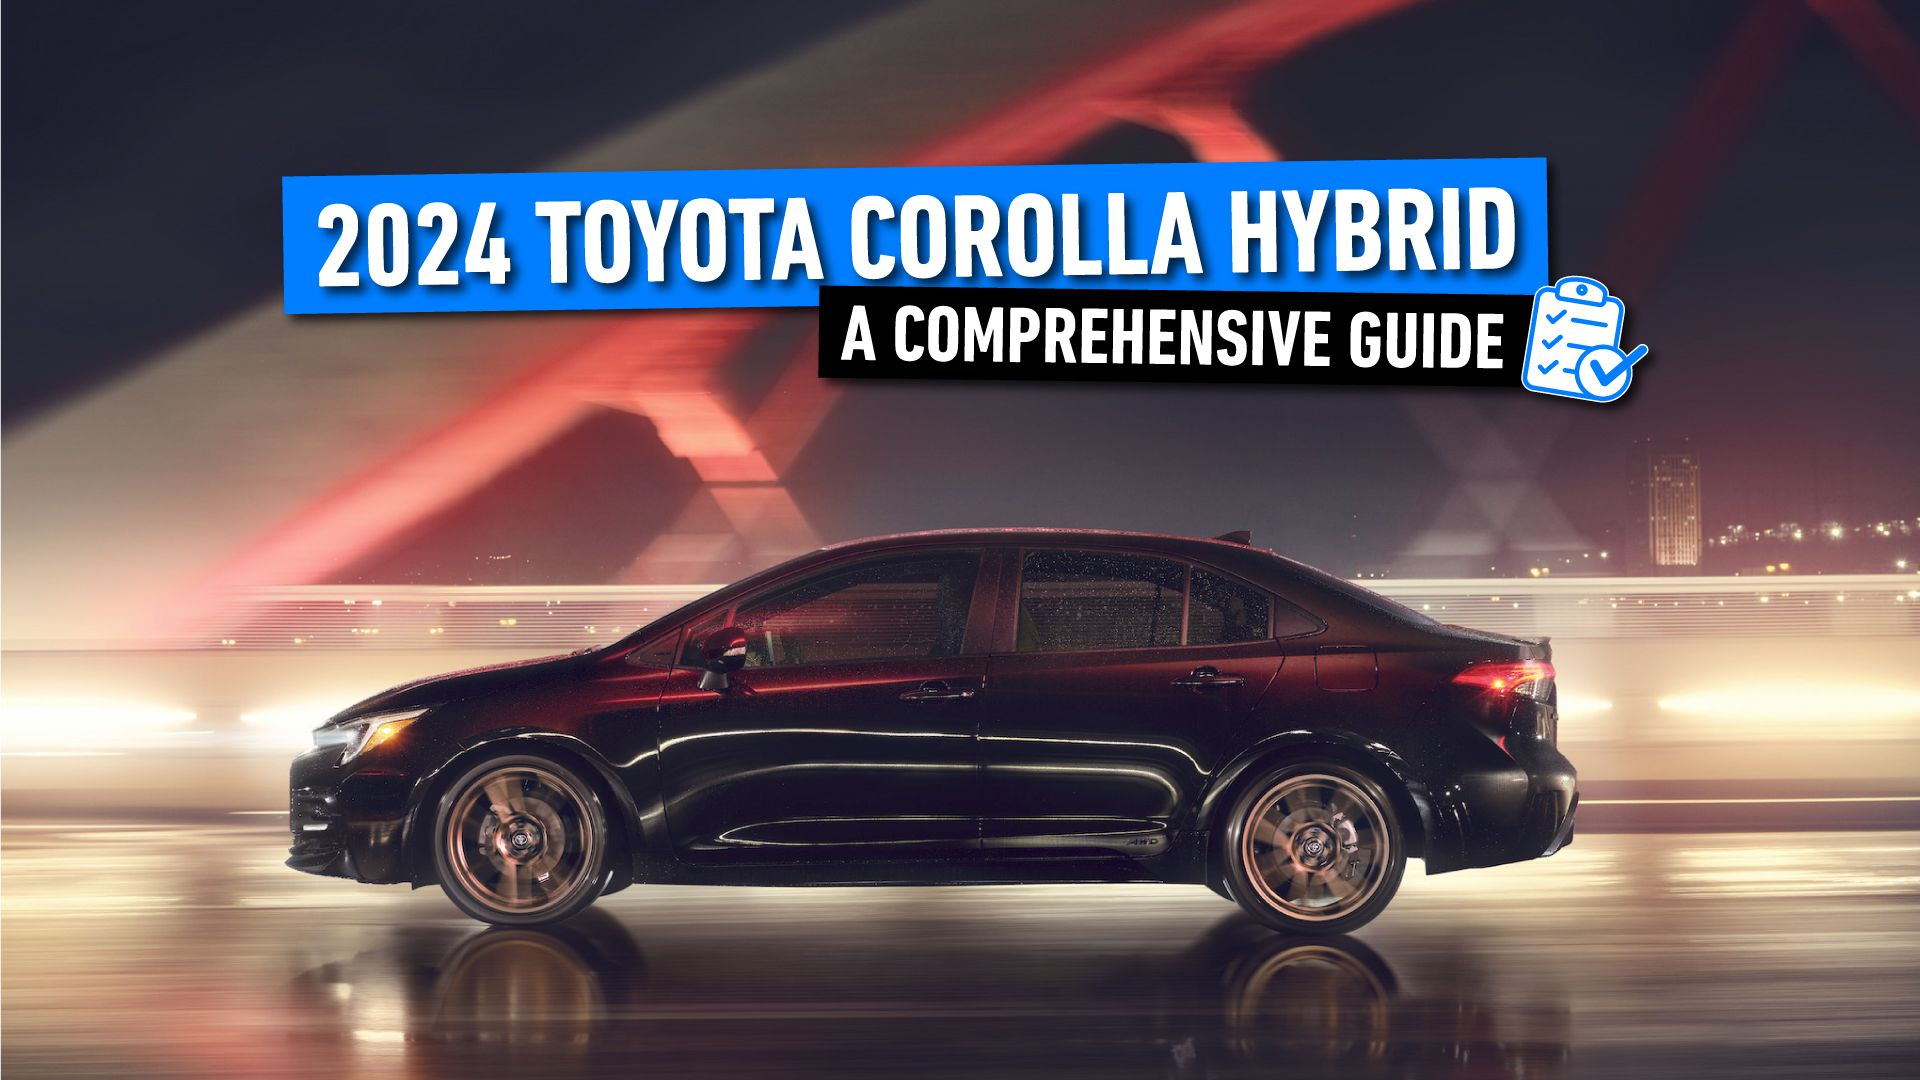 2024 Toyota Corolla Hybrid Comprehensive Guide featured image